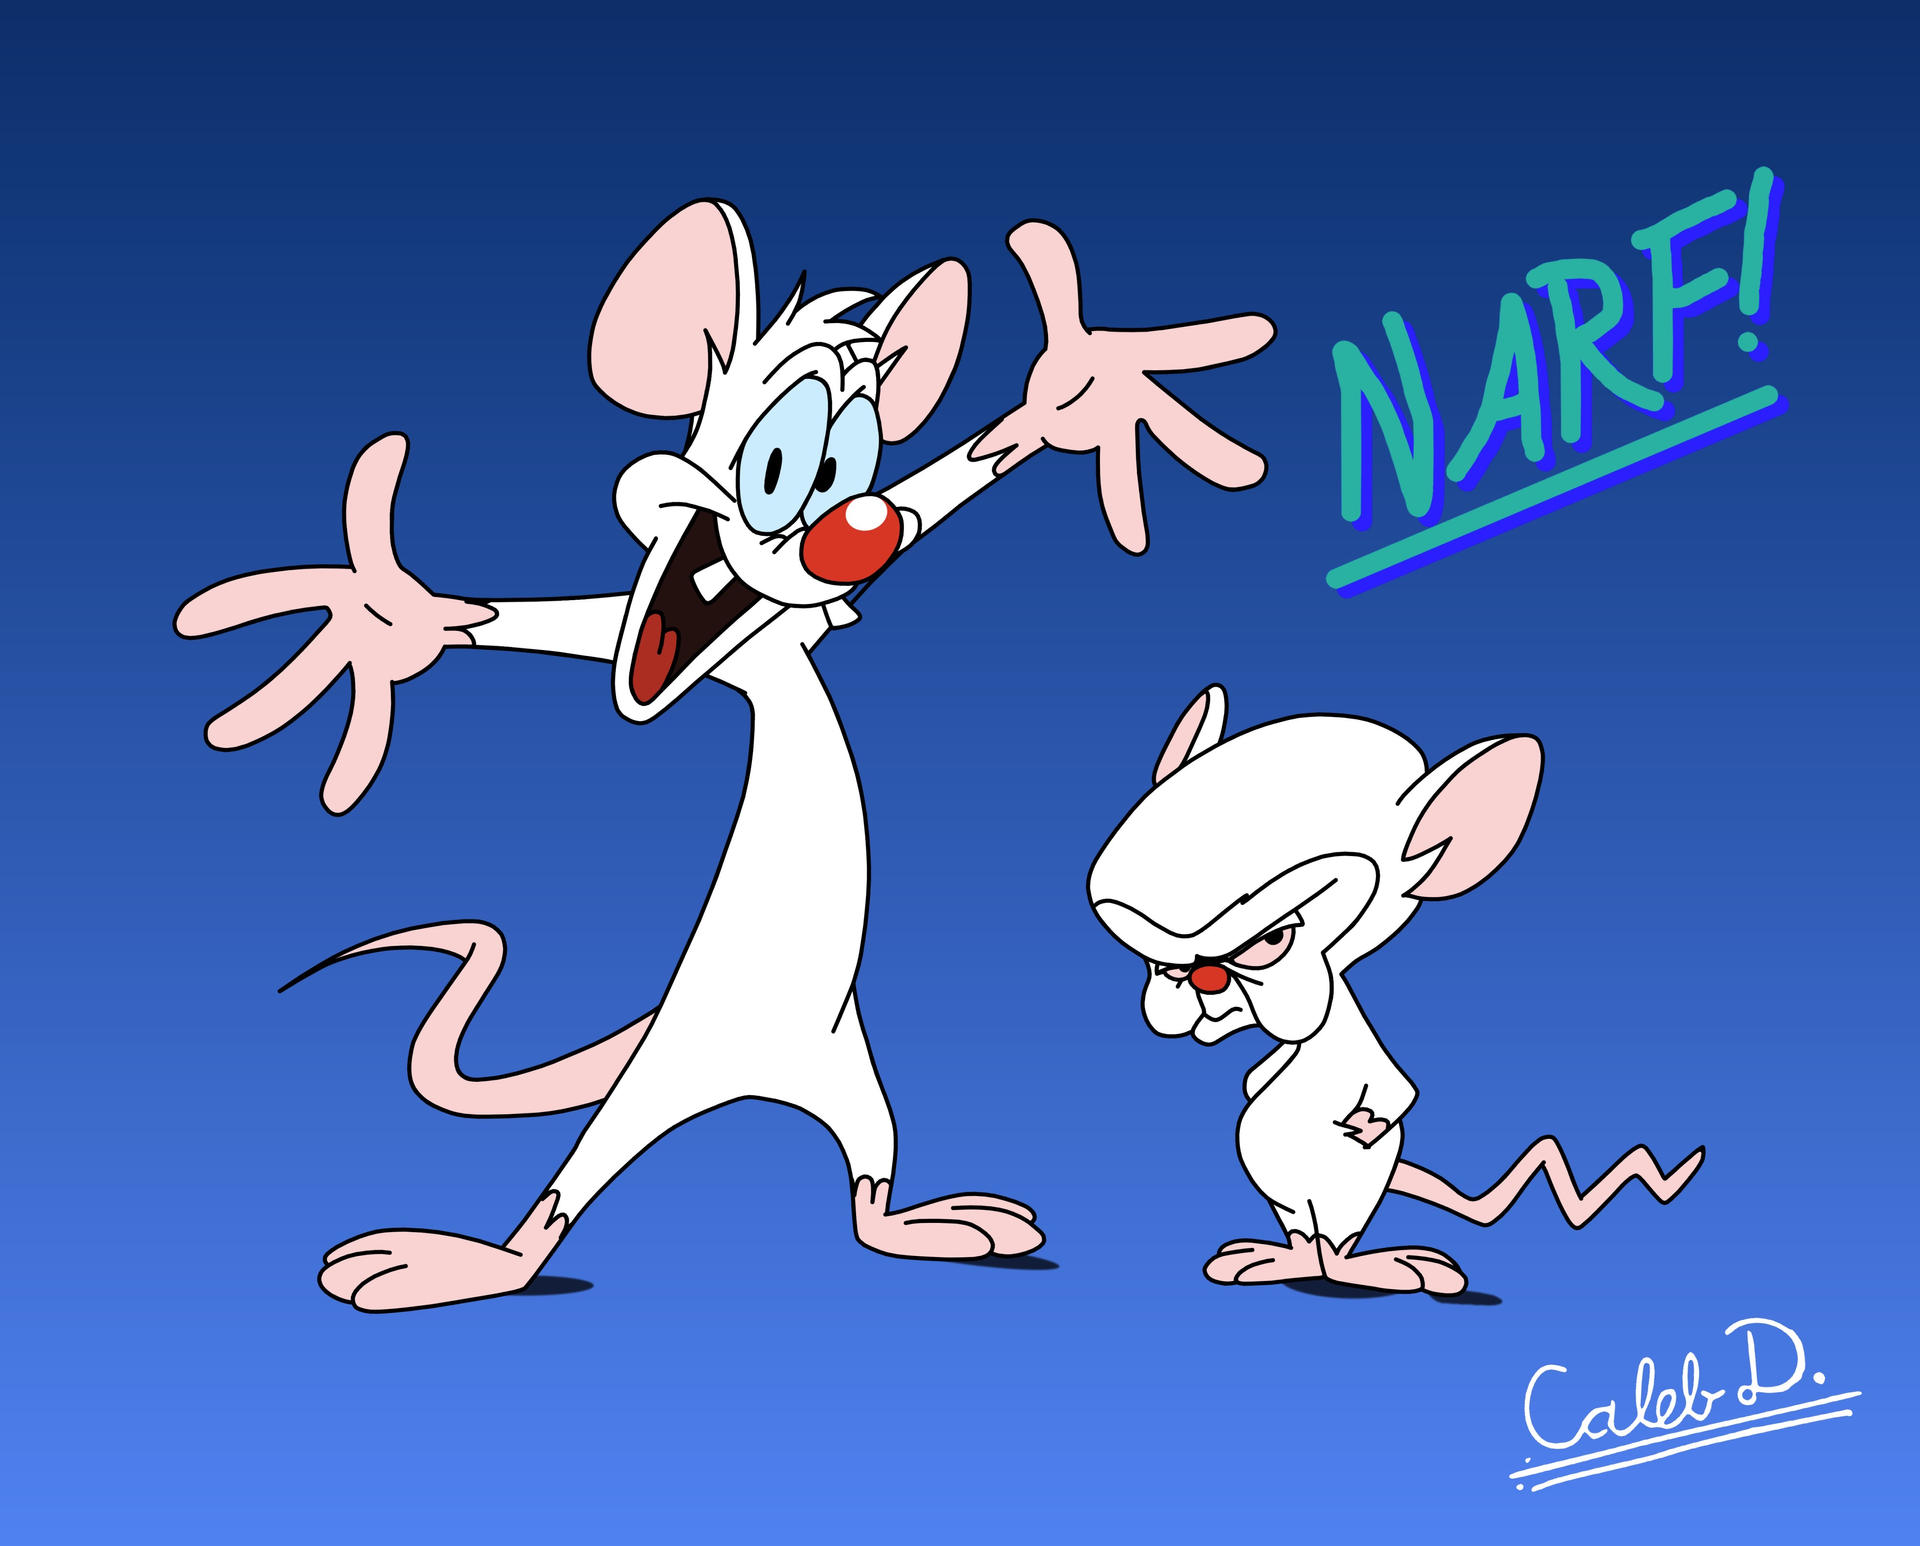 Animaniacs - Pinky and the Brain by CalebDoerksen20 on DeviantArt